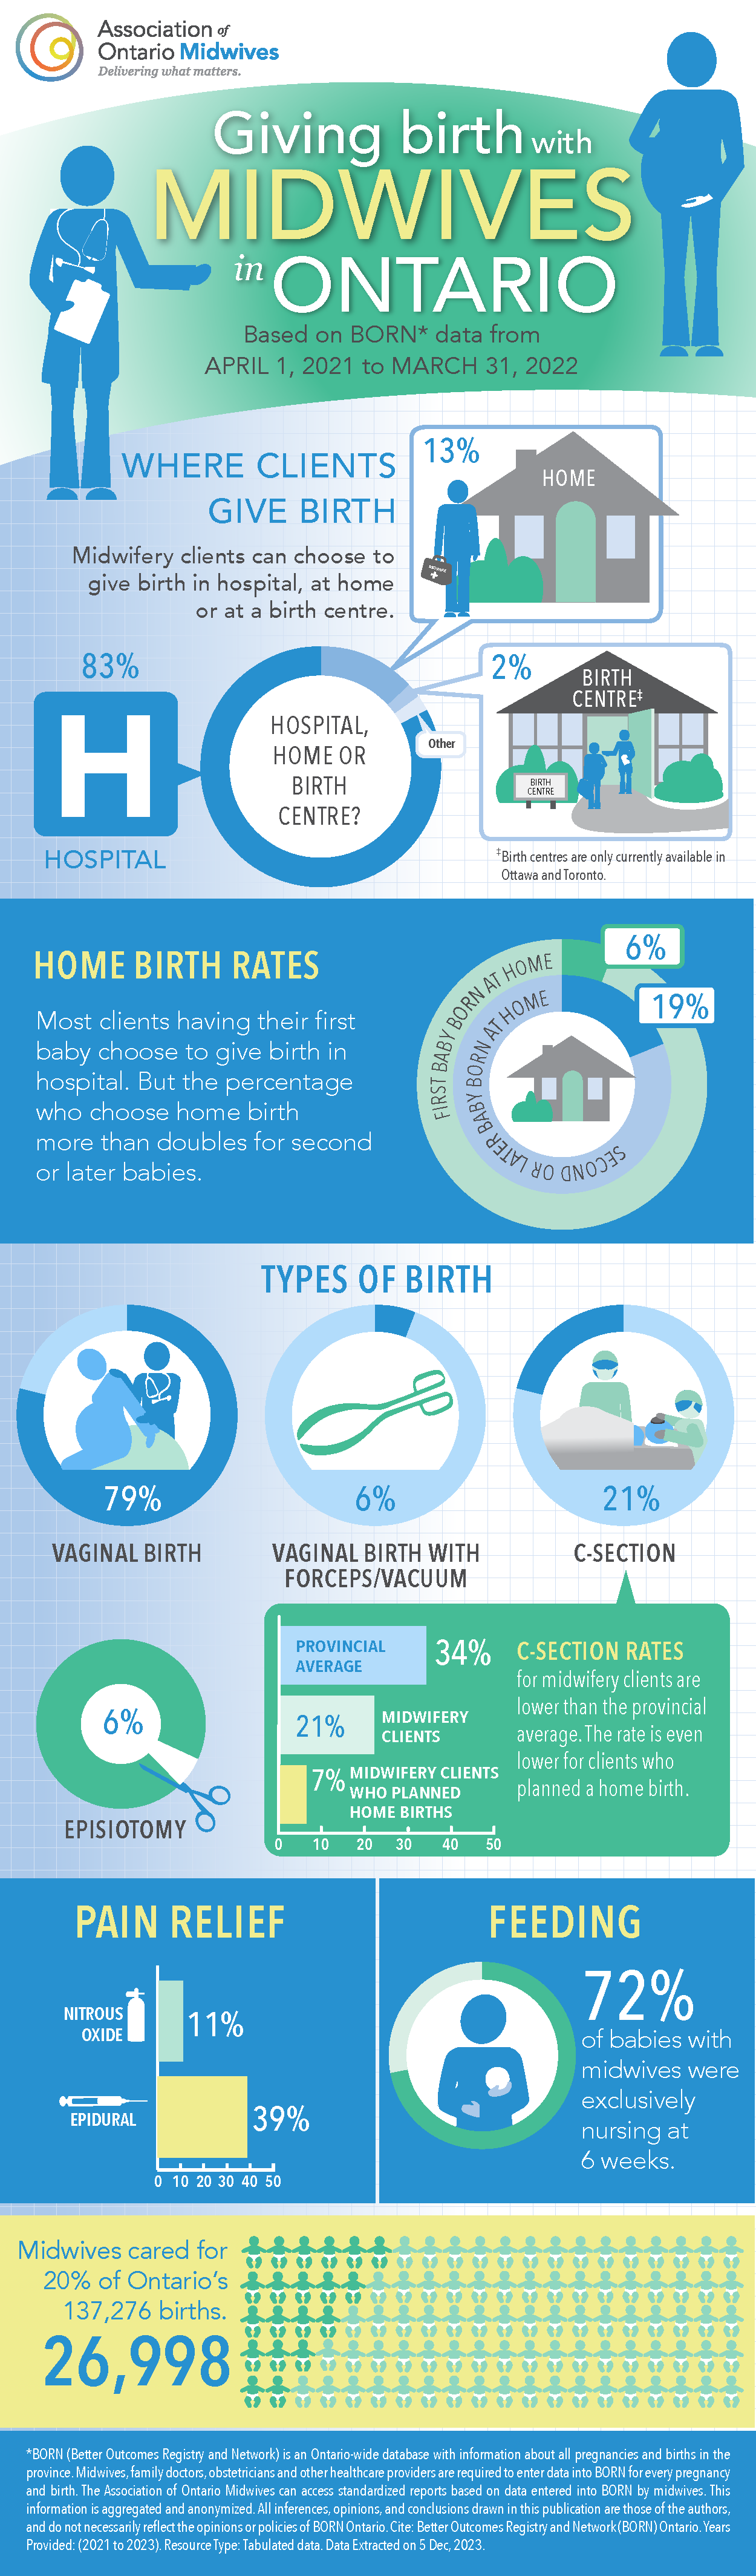 BORN midwifery data infographic; see transcript below for more information.